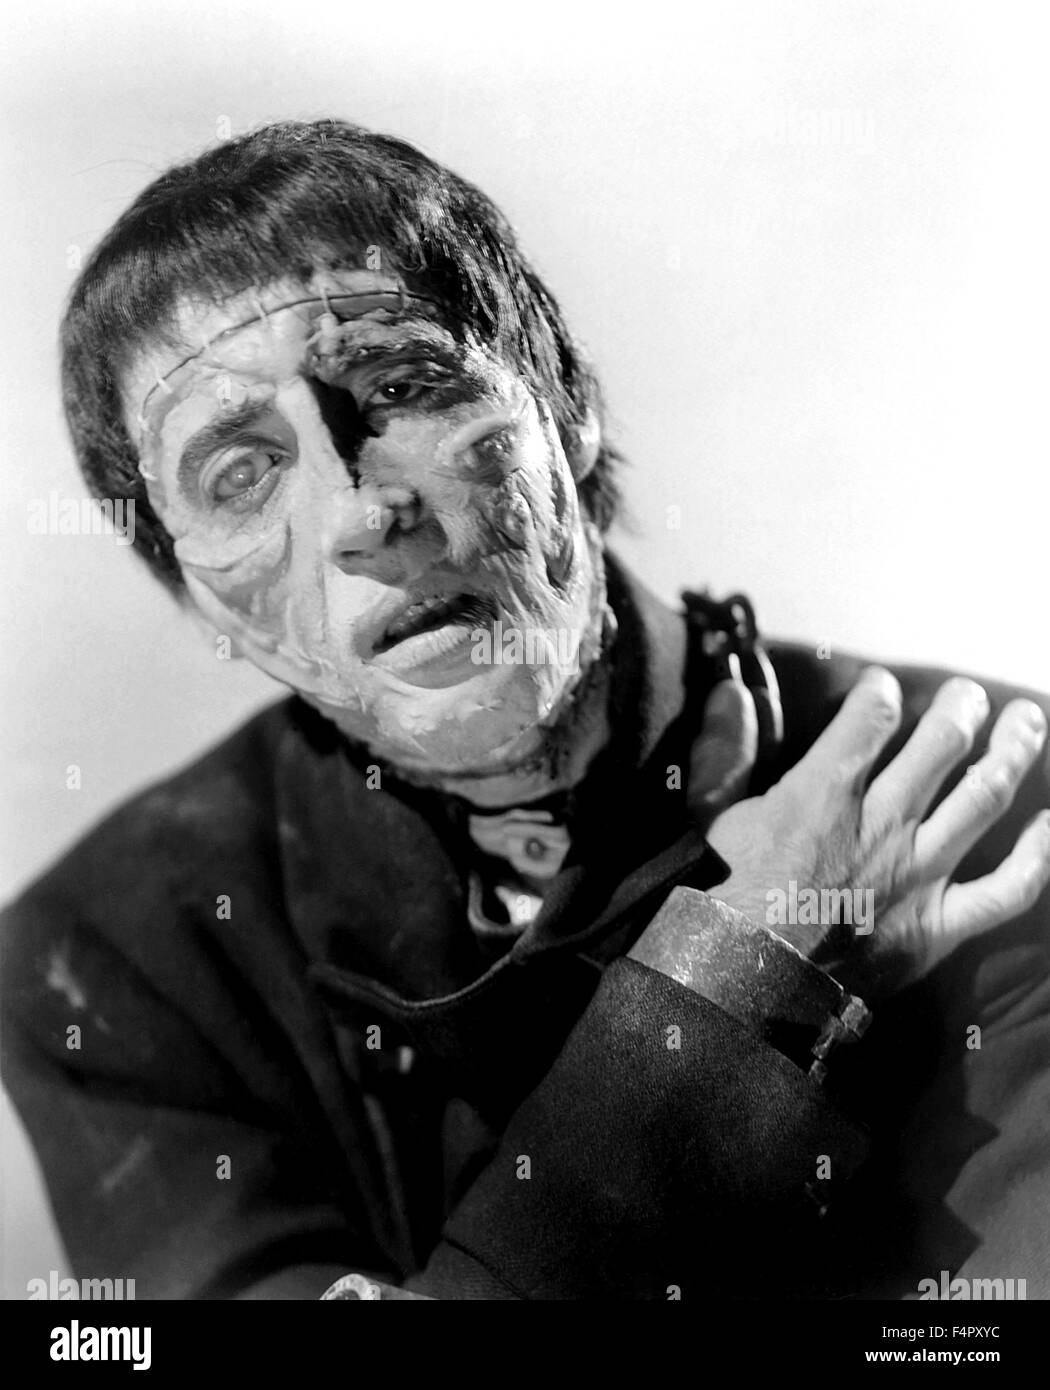 Christopher Lee, The Curse of Frankenstein1957, directed by Terence Fisher, Warner Bros. - Hammer Film Productions. Stock Photo